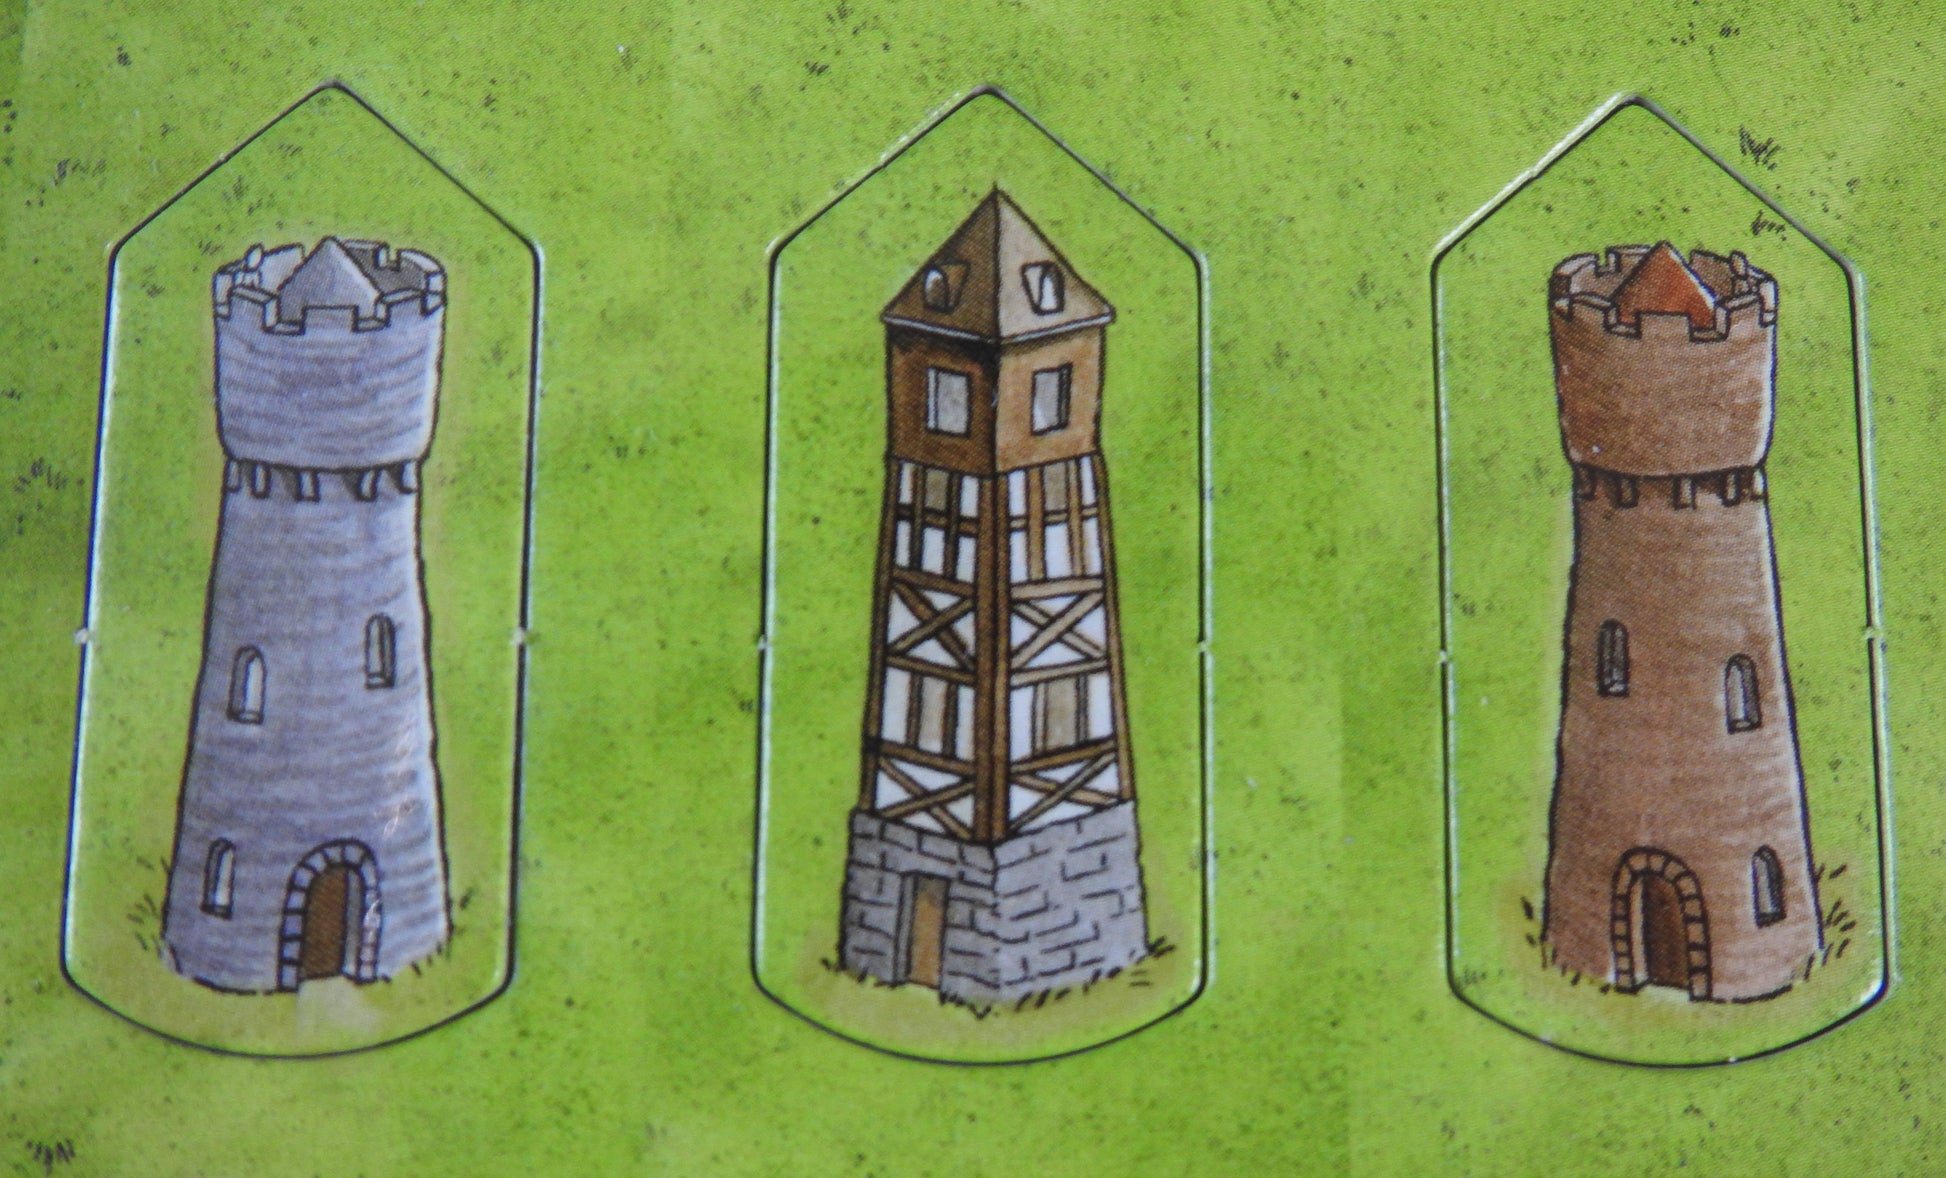 Close-up of 3 more tower tokens.